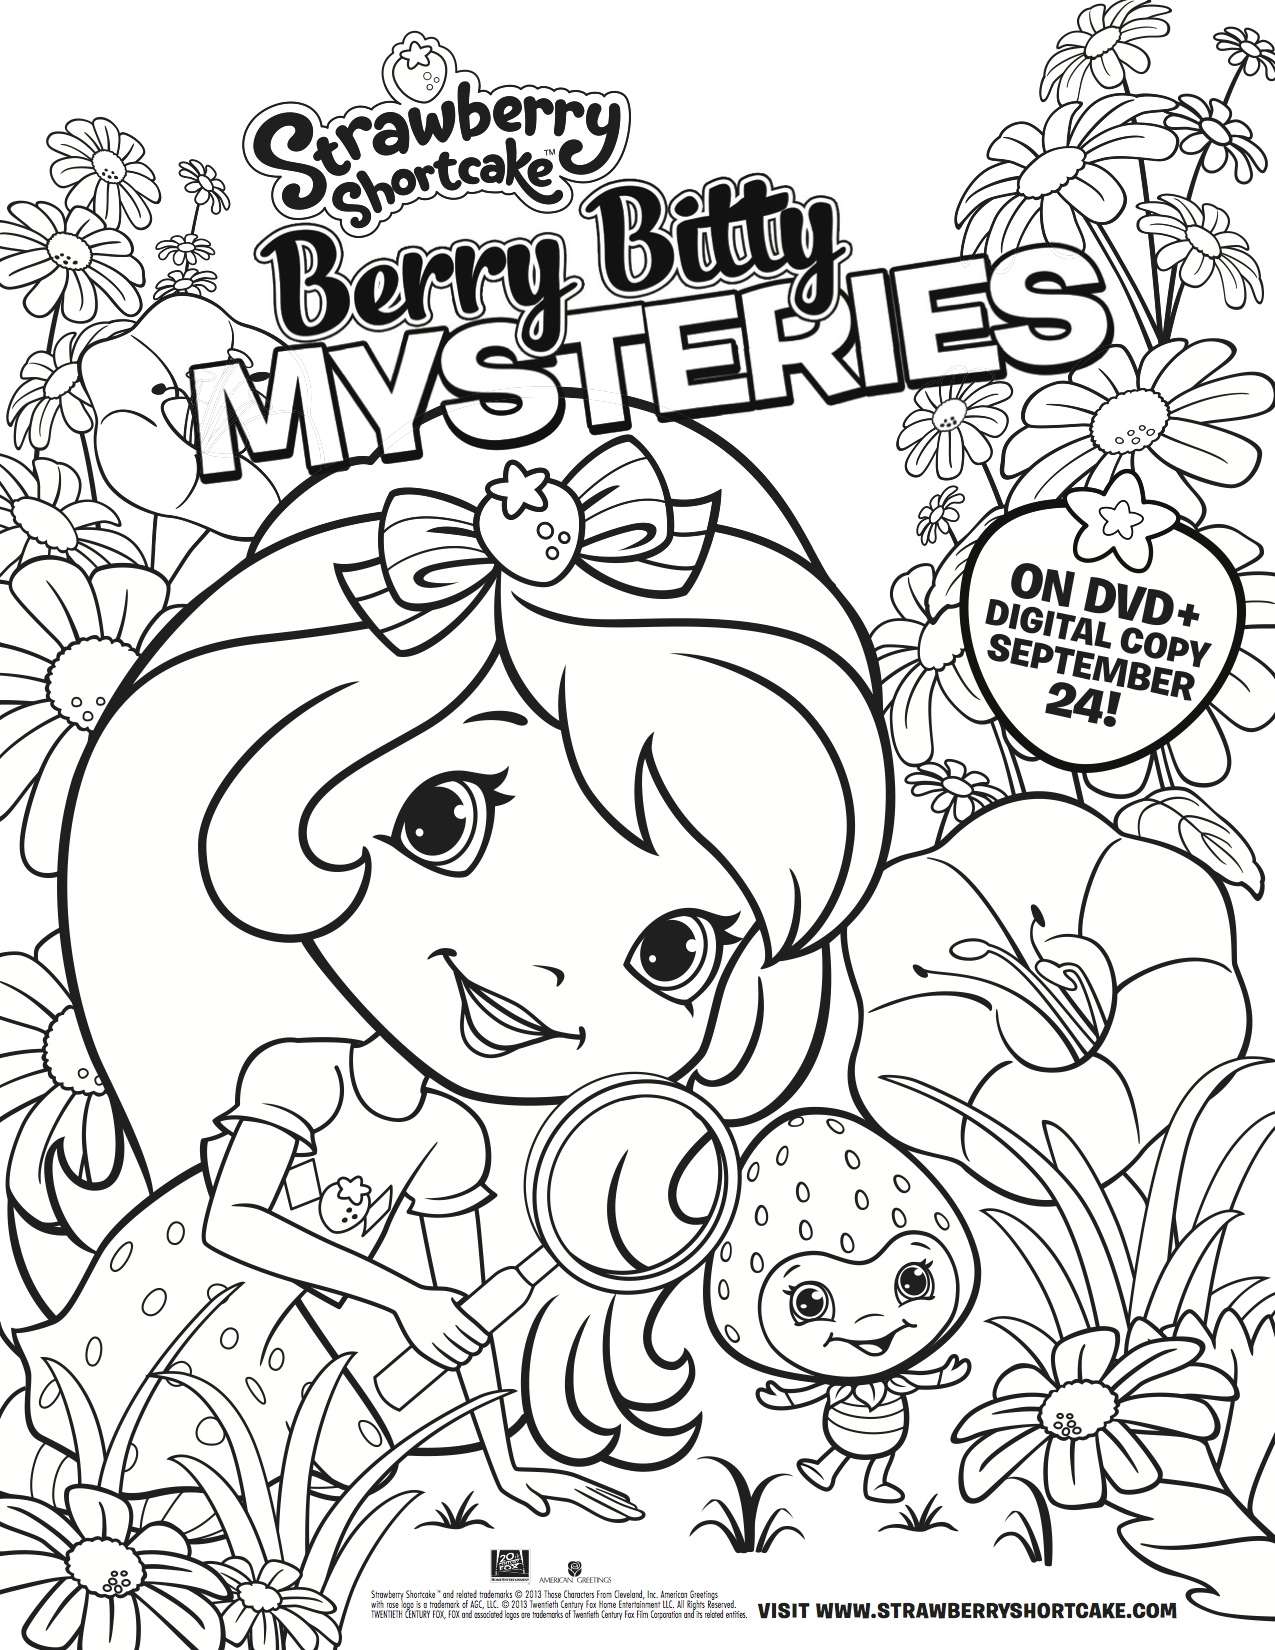 strawberry shortcake coloring berry bitty mysteries page